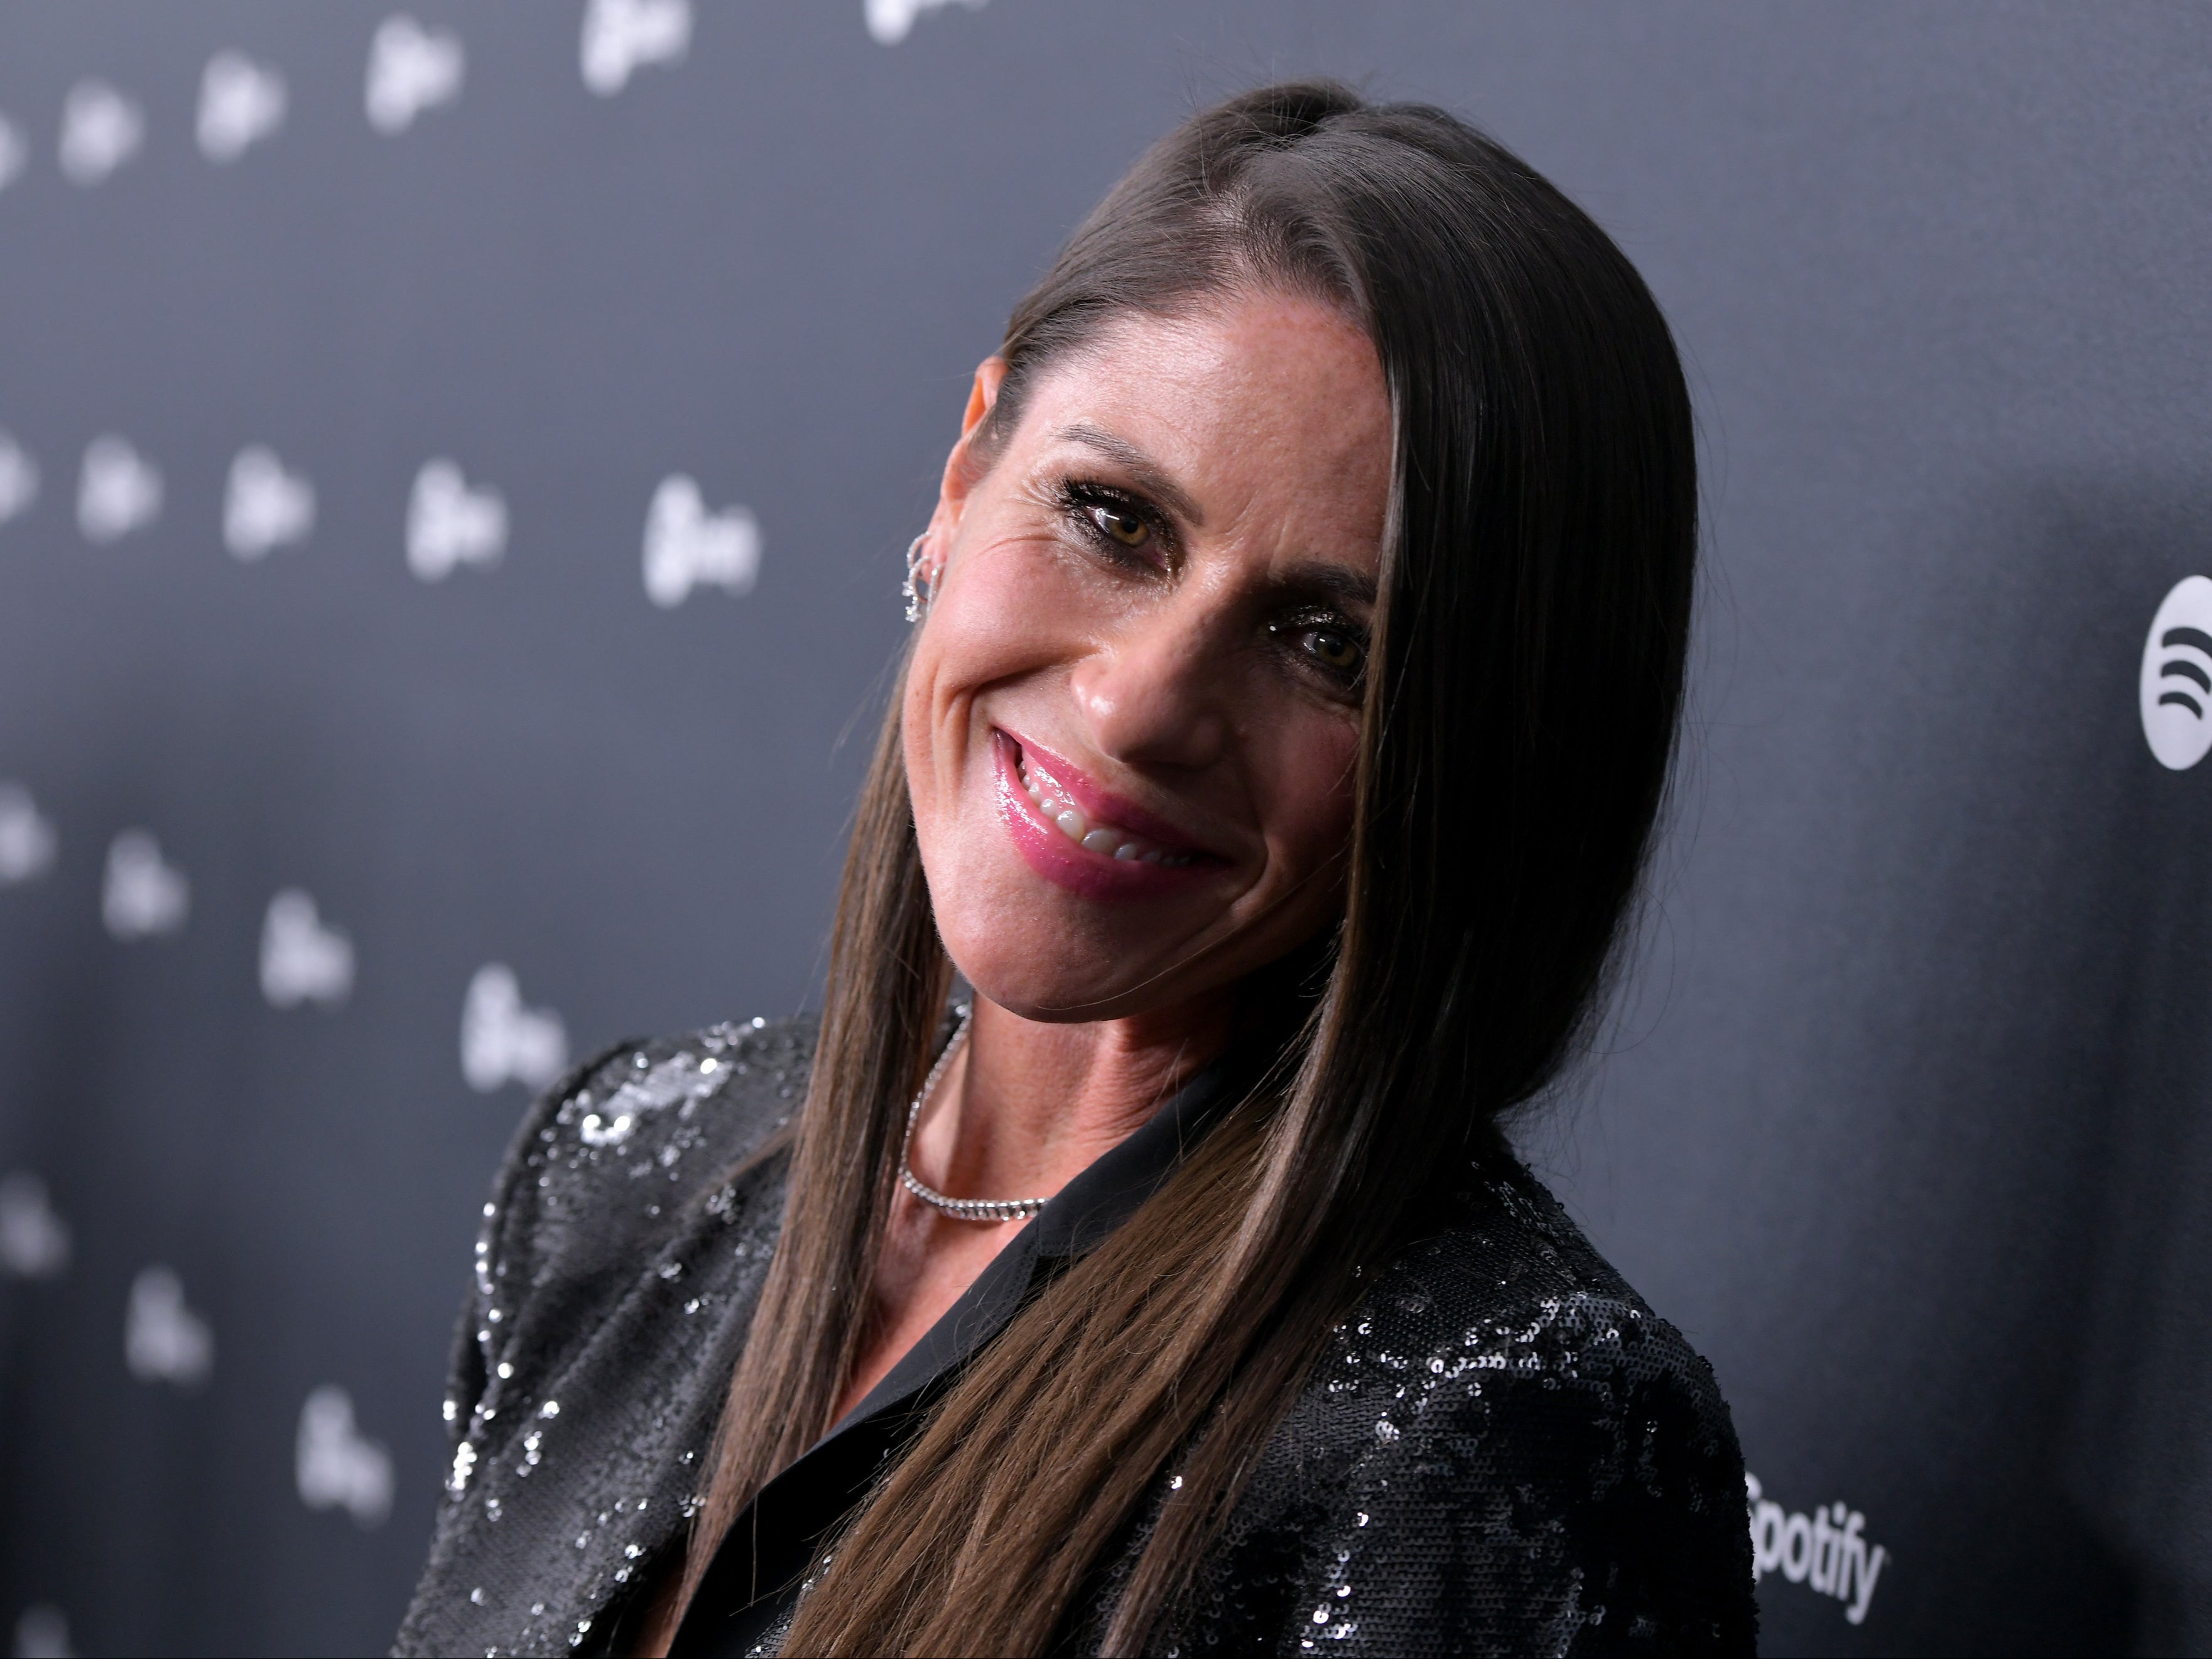 Soleil Moon Frye at a Spotify event on 23 January 2020 in Los Angeles, California